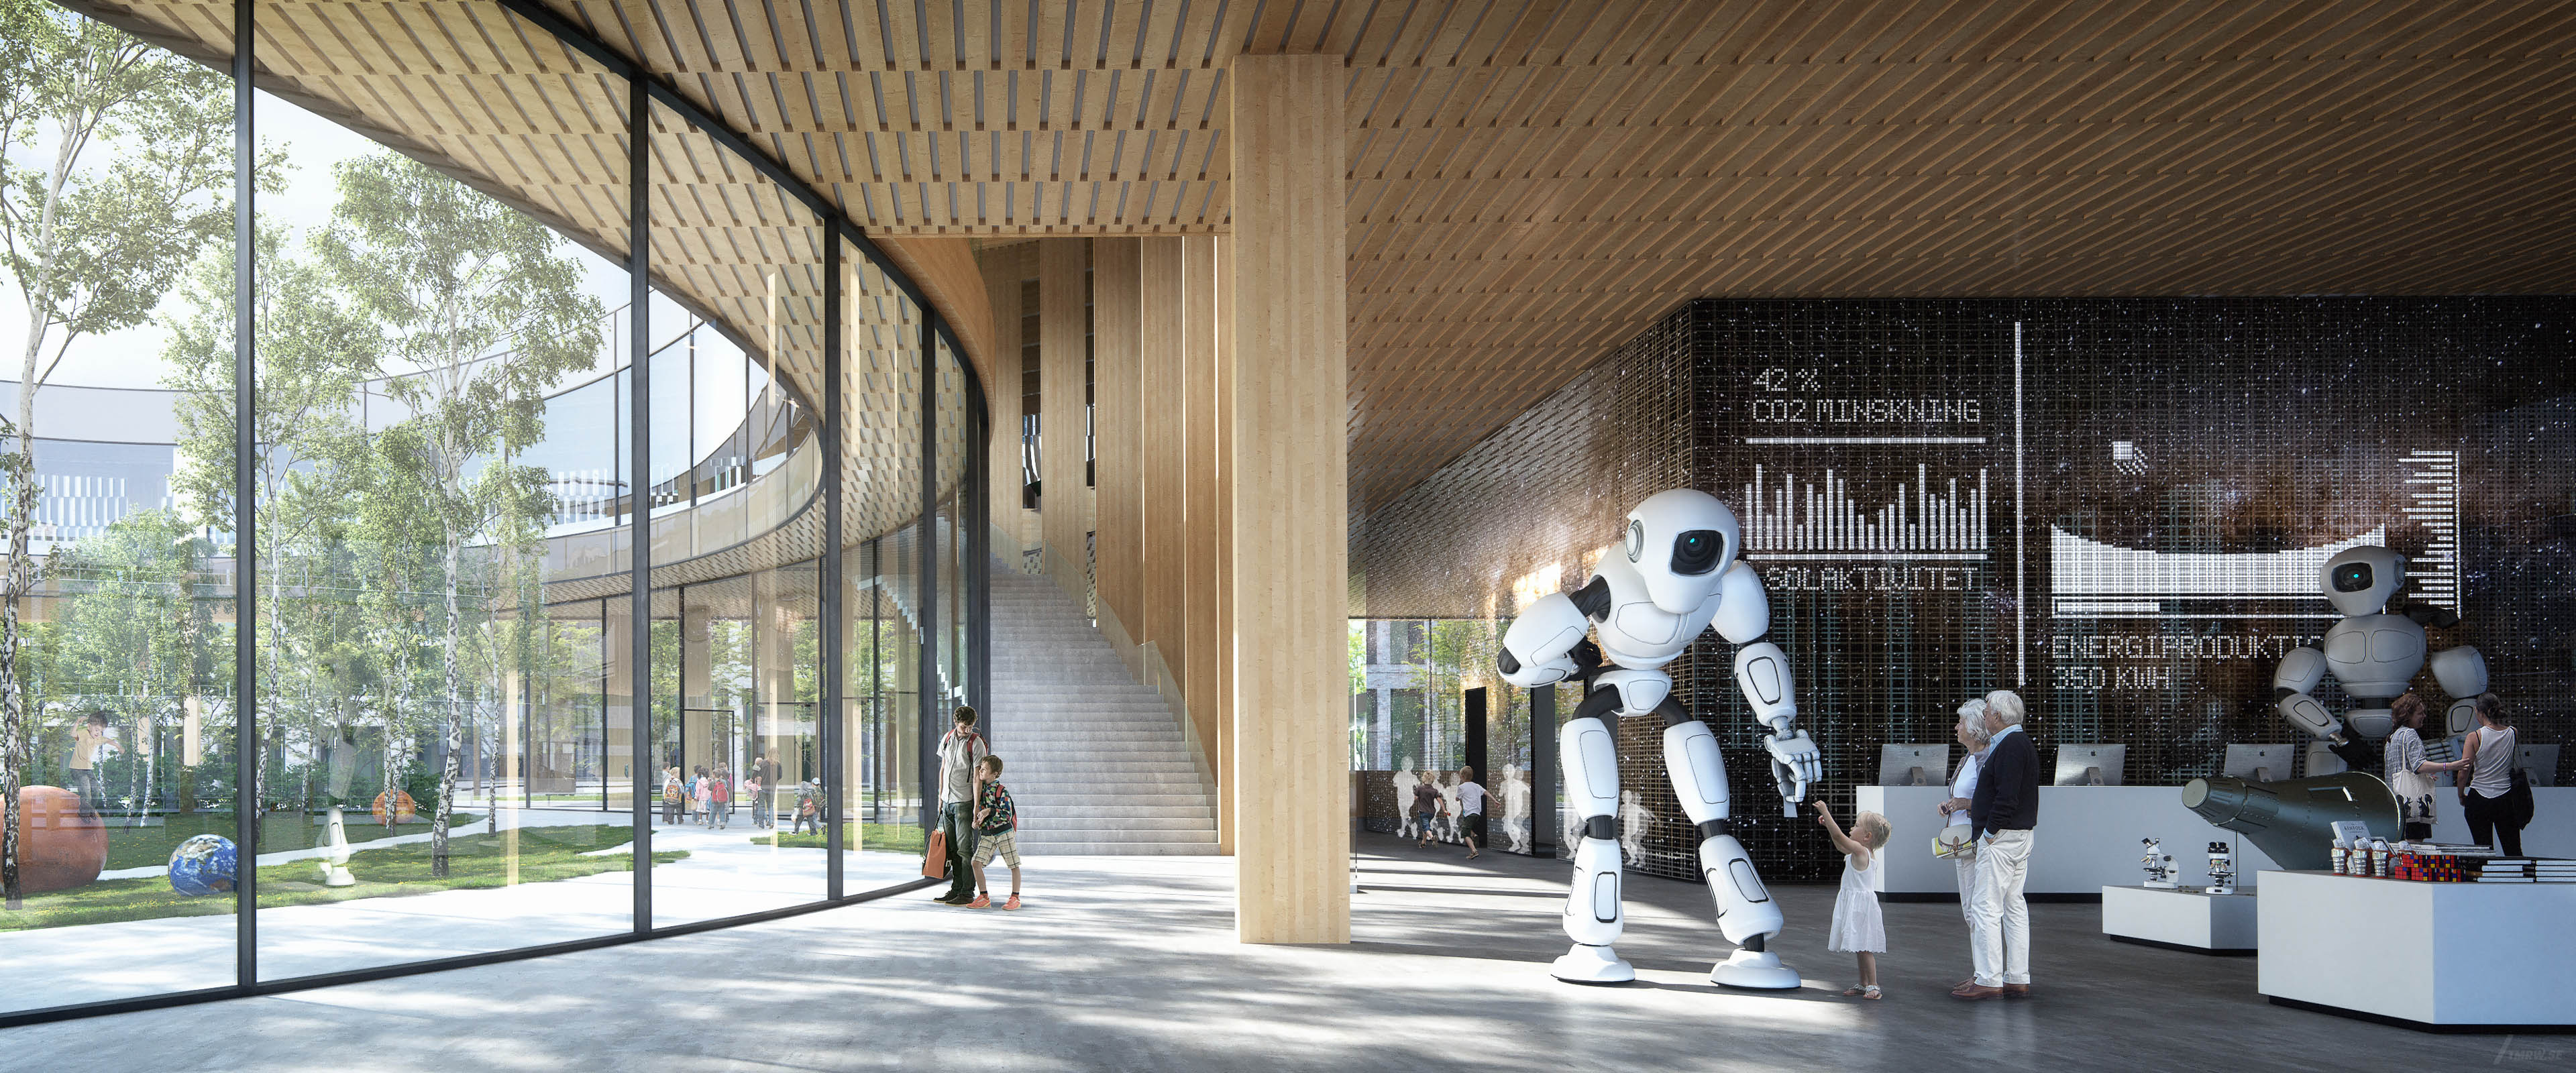 Architectural visualization of Lund Science Center for Cobe, interior of entrance floor, giant robot shaking hands with girl